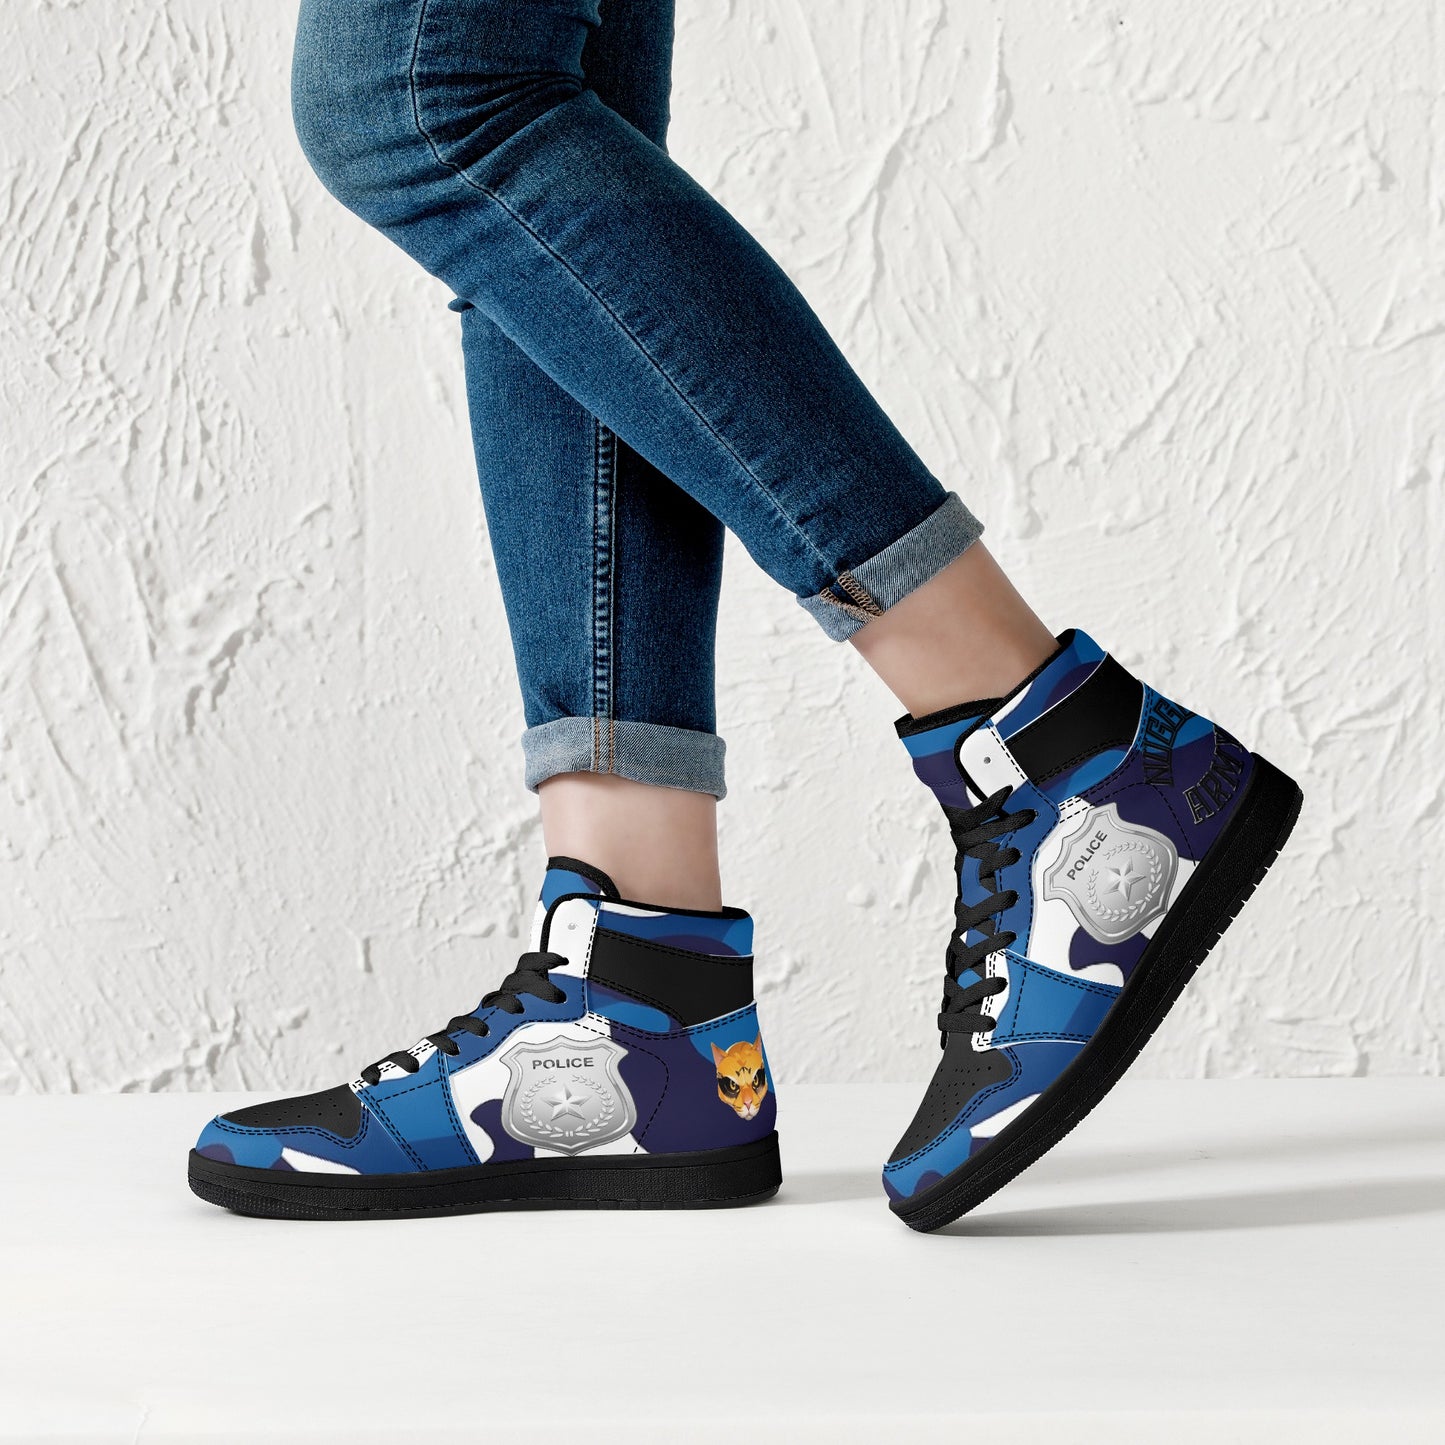 Stand out  with the  Nugget Army Police Womens Black High Top Leather Sneakers  available at Hey Nugget. Grab yours today!